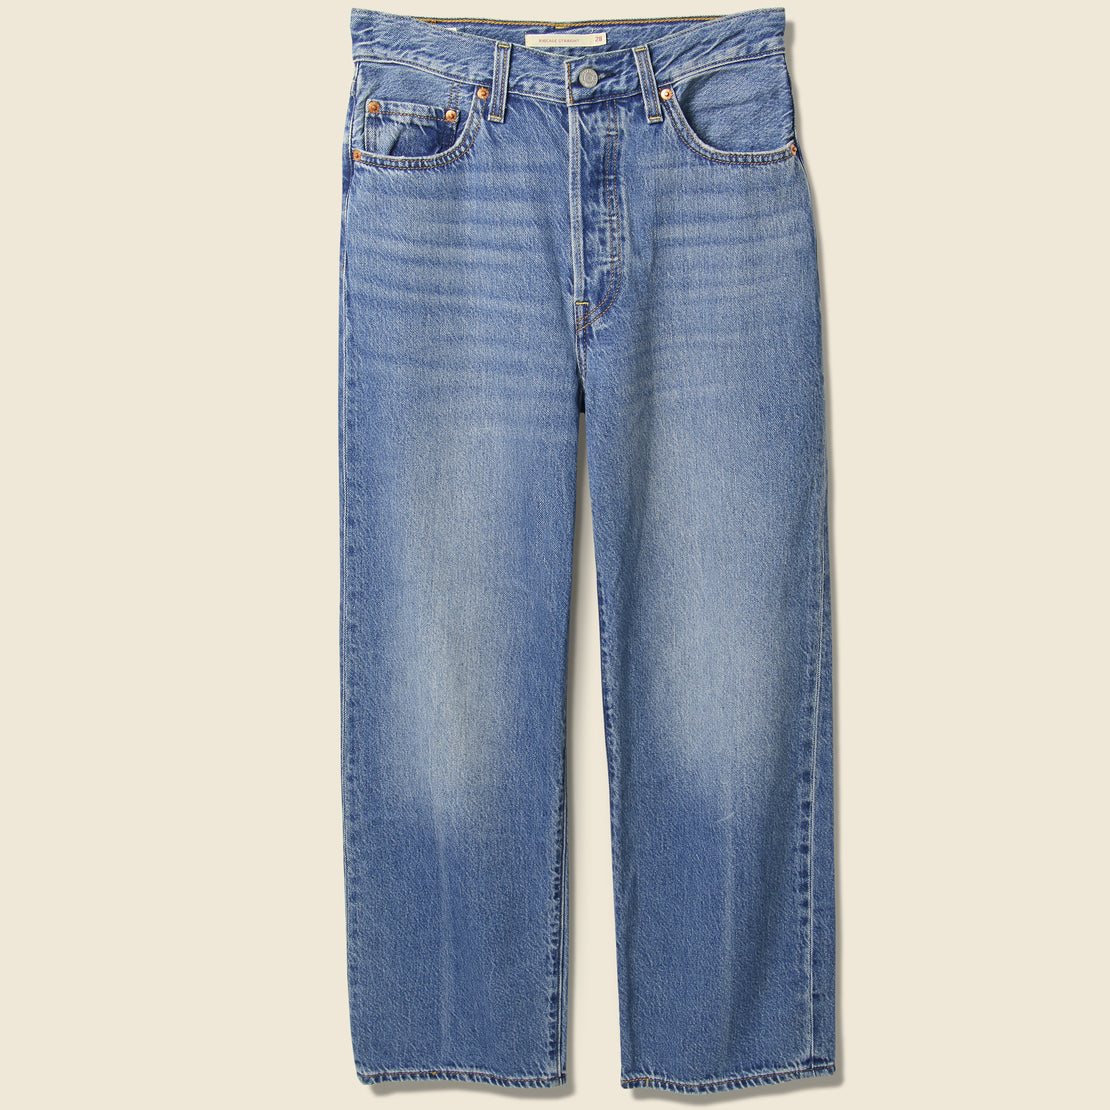 Levis Premium Ribcage Straight Ankle Jean - At The Ready